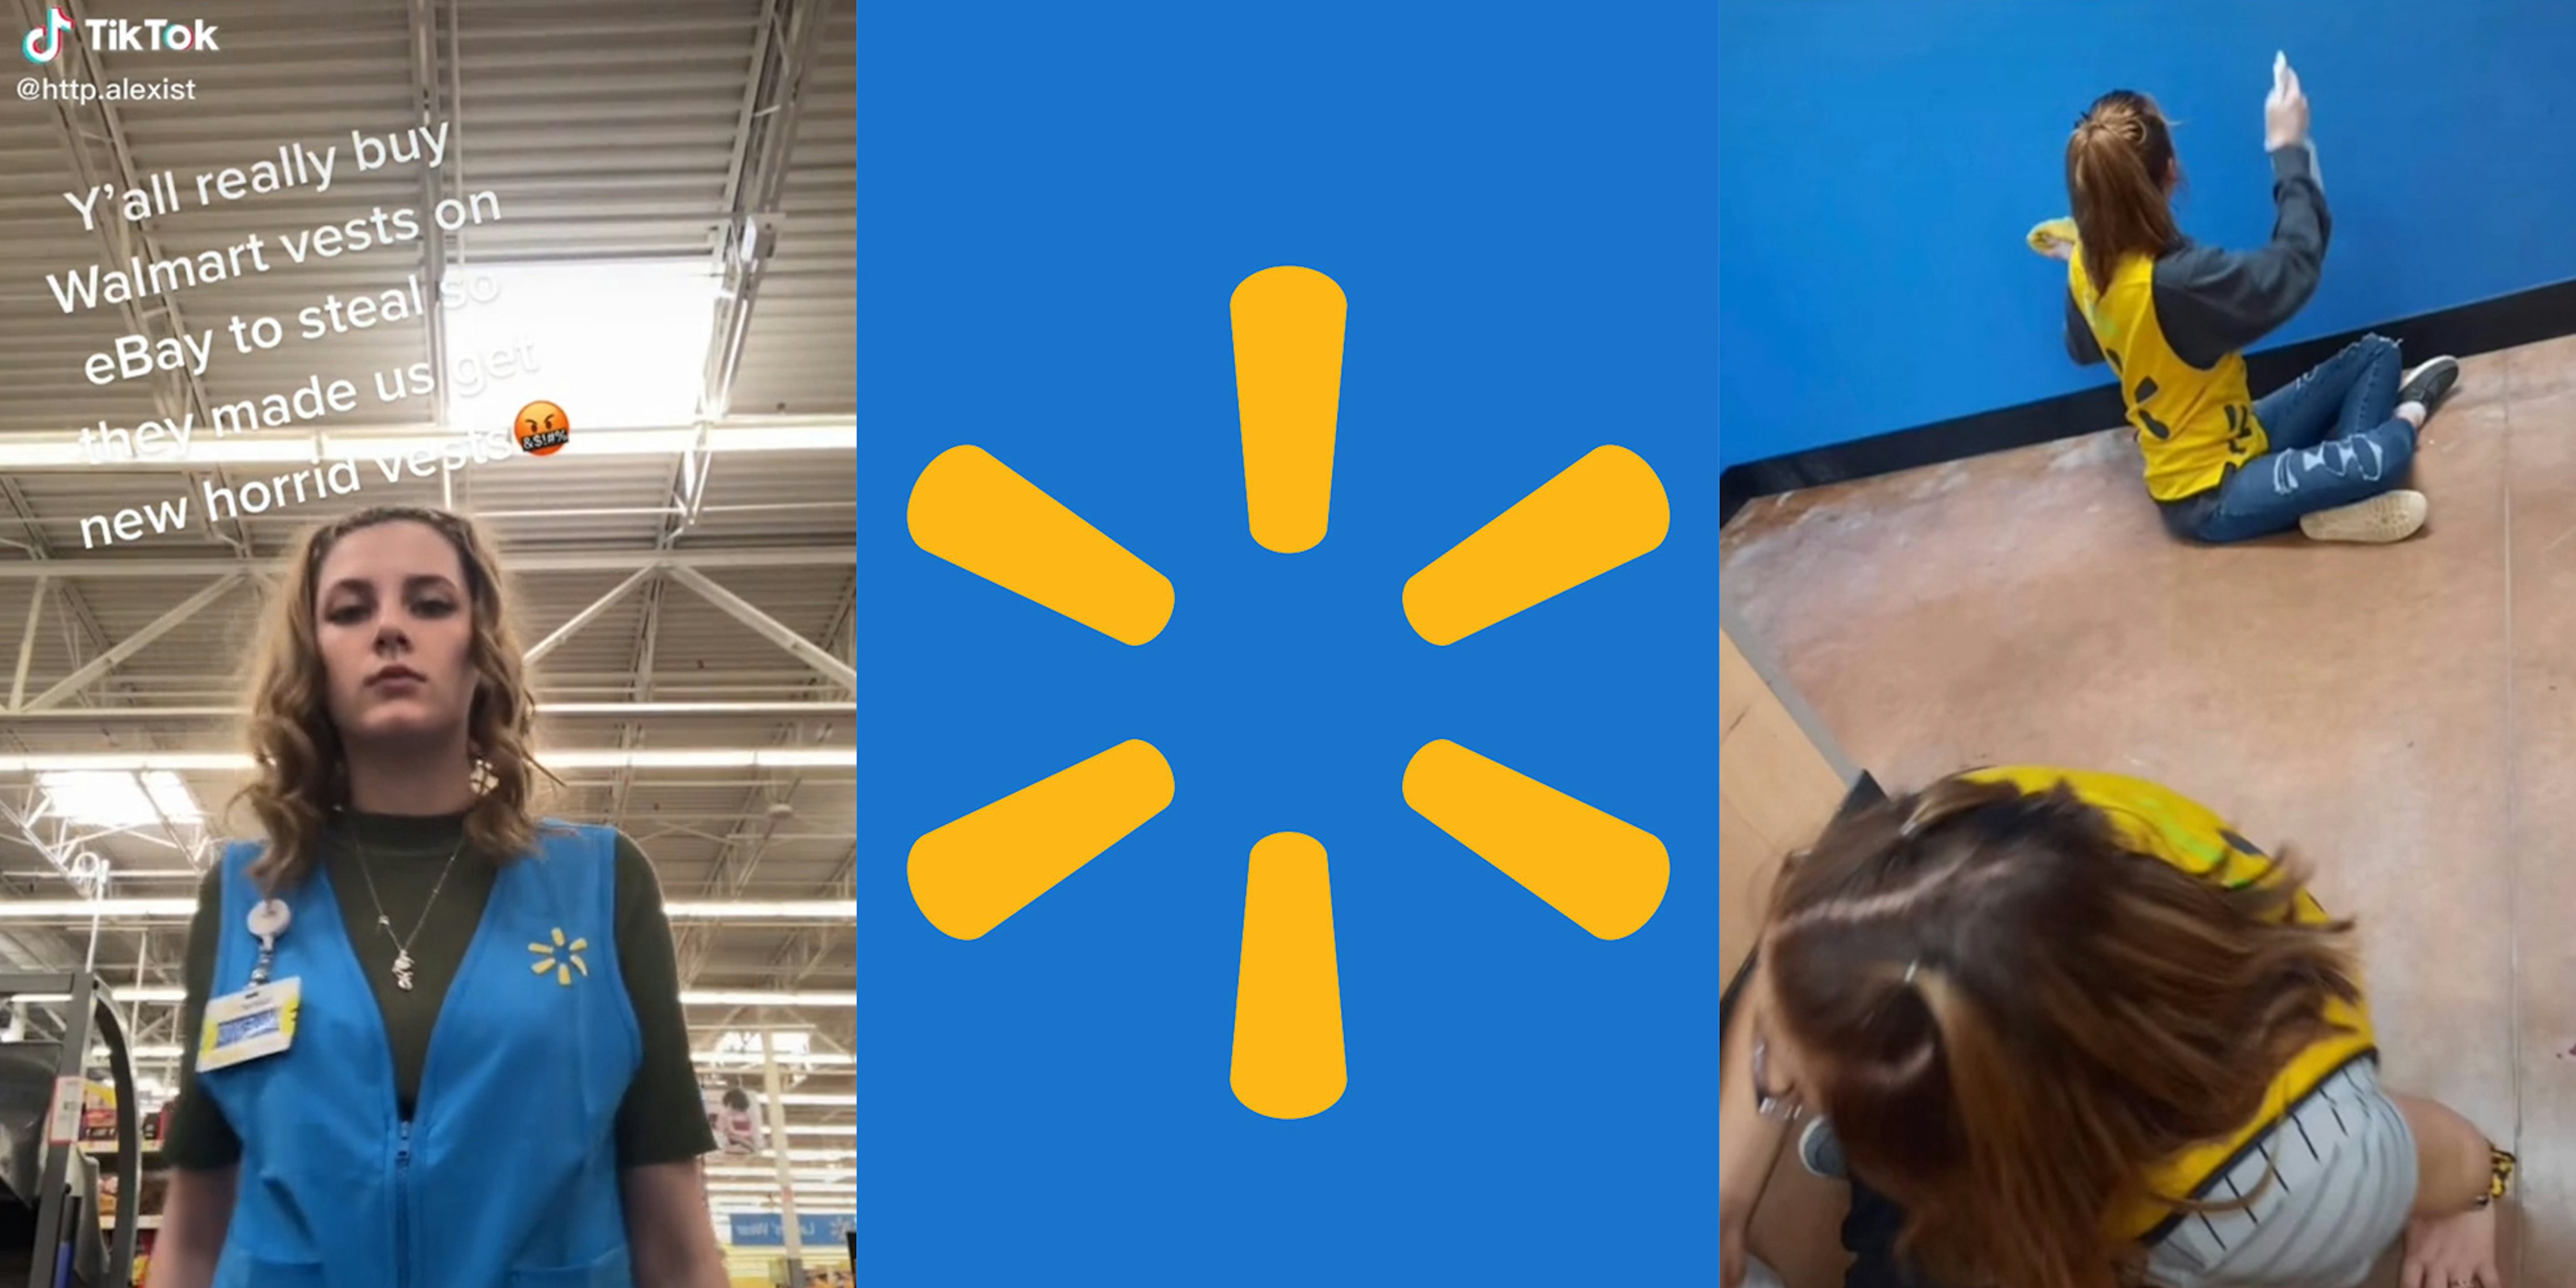 young woman working in walmart with caption 'Y'all really buy Walmart vests on eBay to steal so they made us get new horrid vests' (l) walmart logo (c) two employees in yellow walmart vests (r)